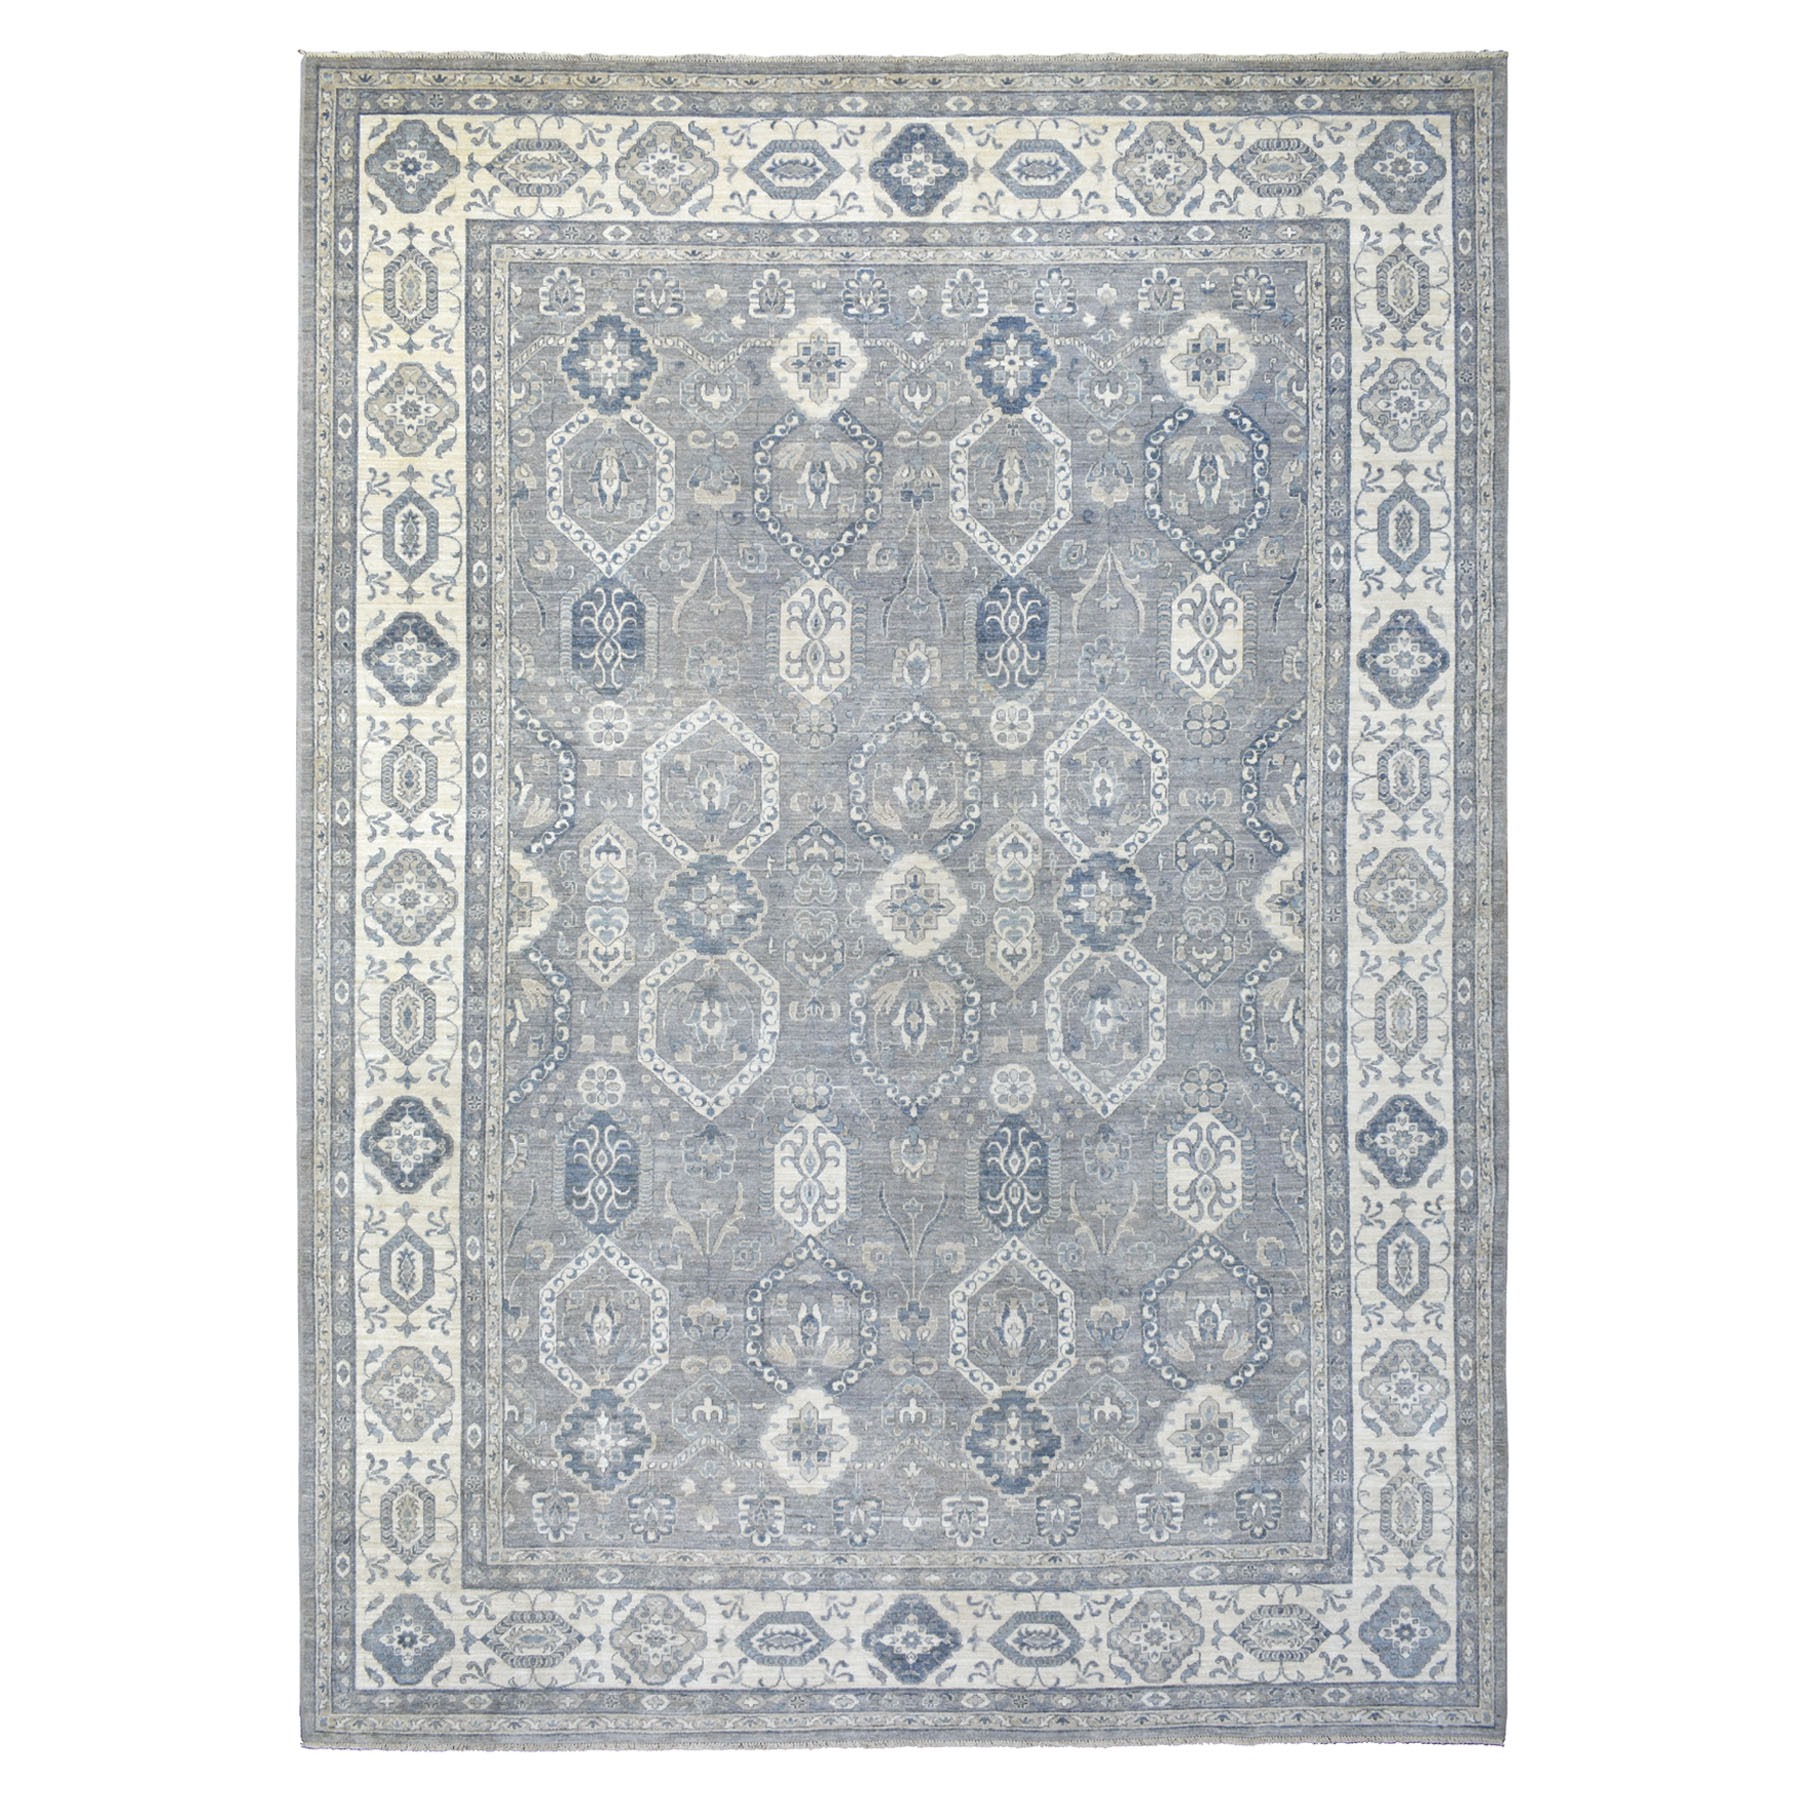 Agra And Turkish Collection Hand Knotted Grey Rug No: 1113550